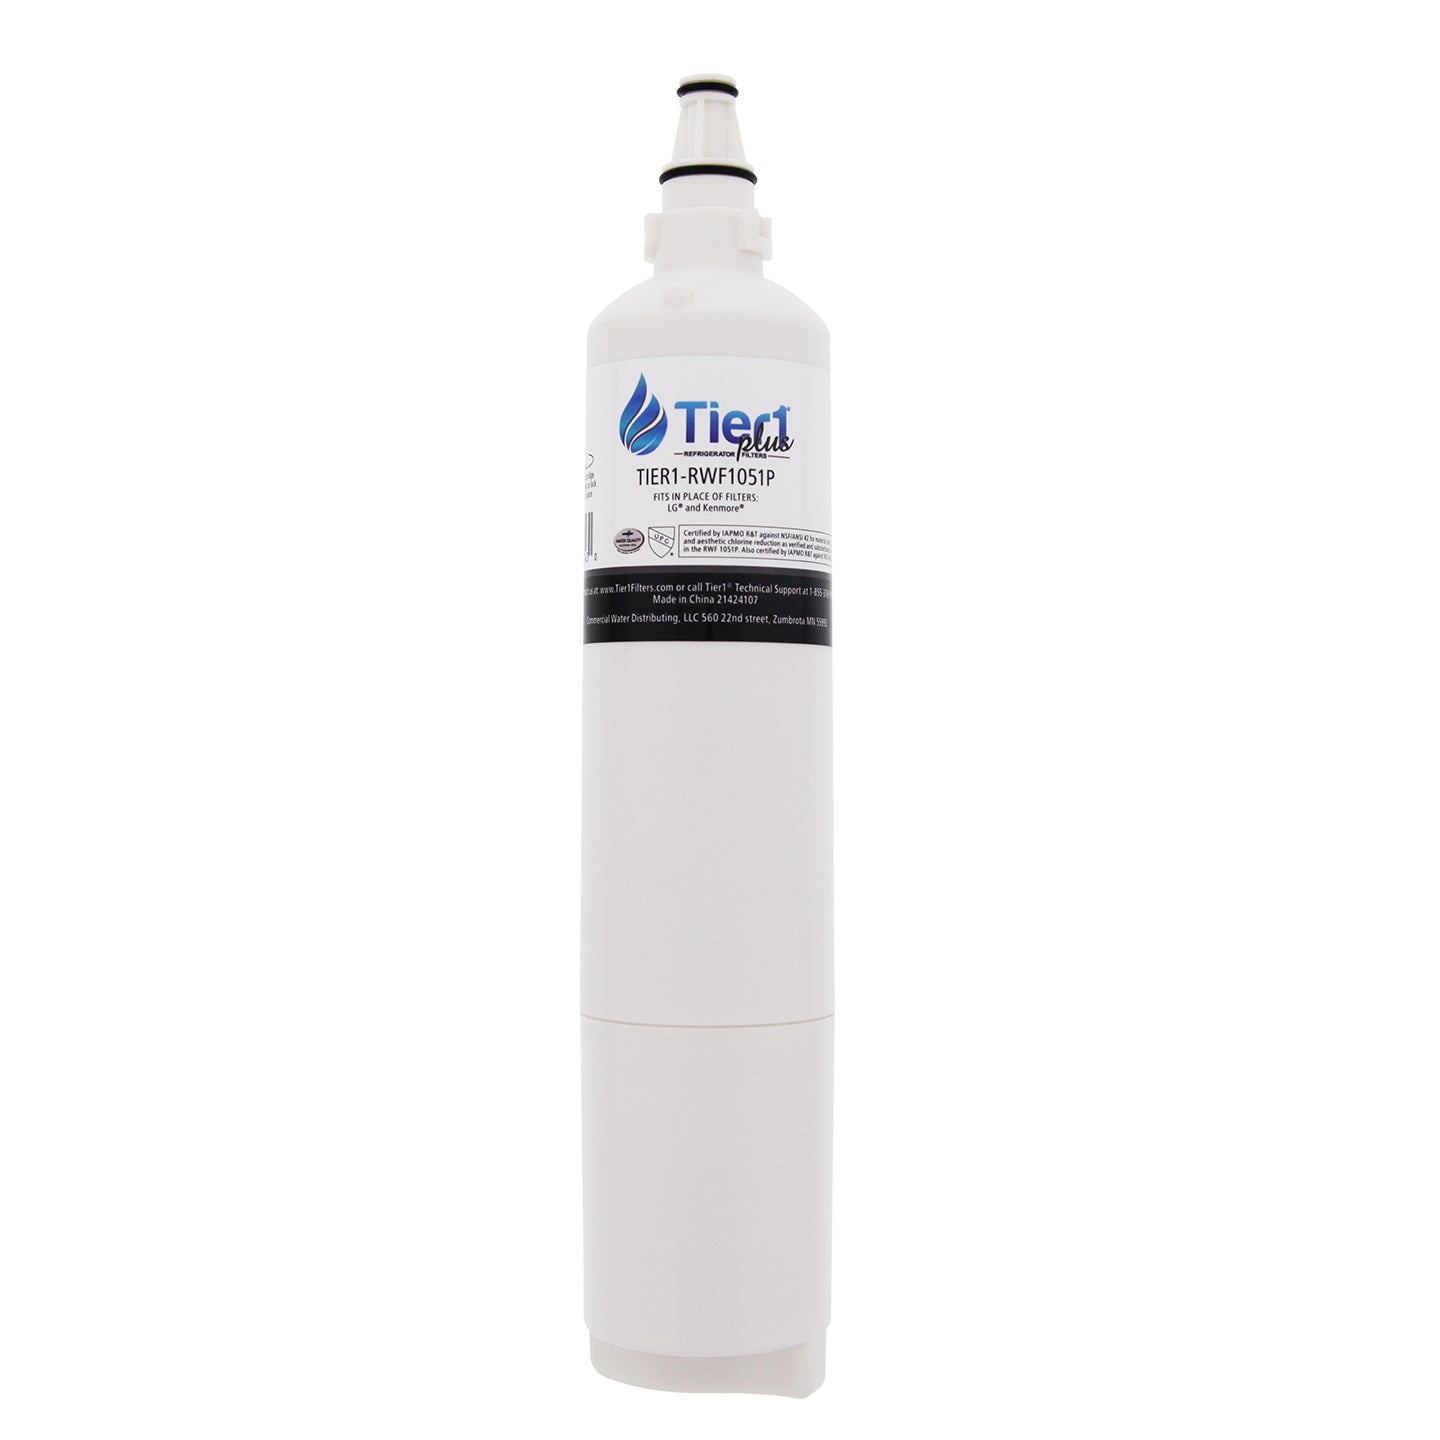 5231JA2006A / LT600P LG Comparable Tier1 Plus Lead Reducing Refrigerator Water Filter Replacement (Front View)